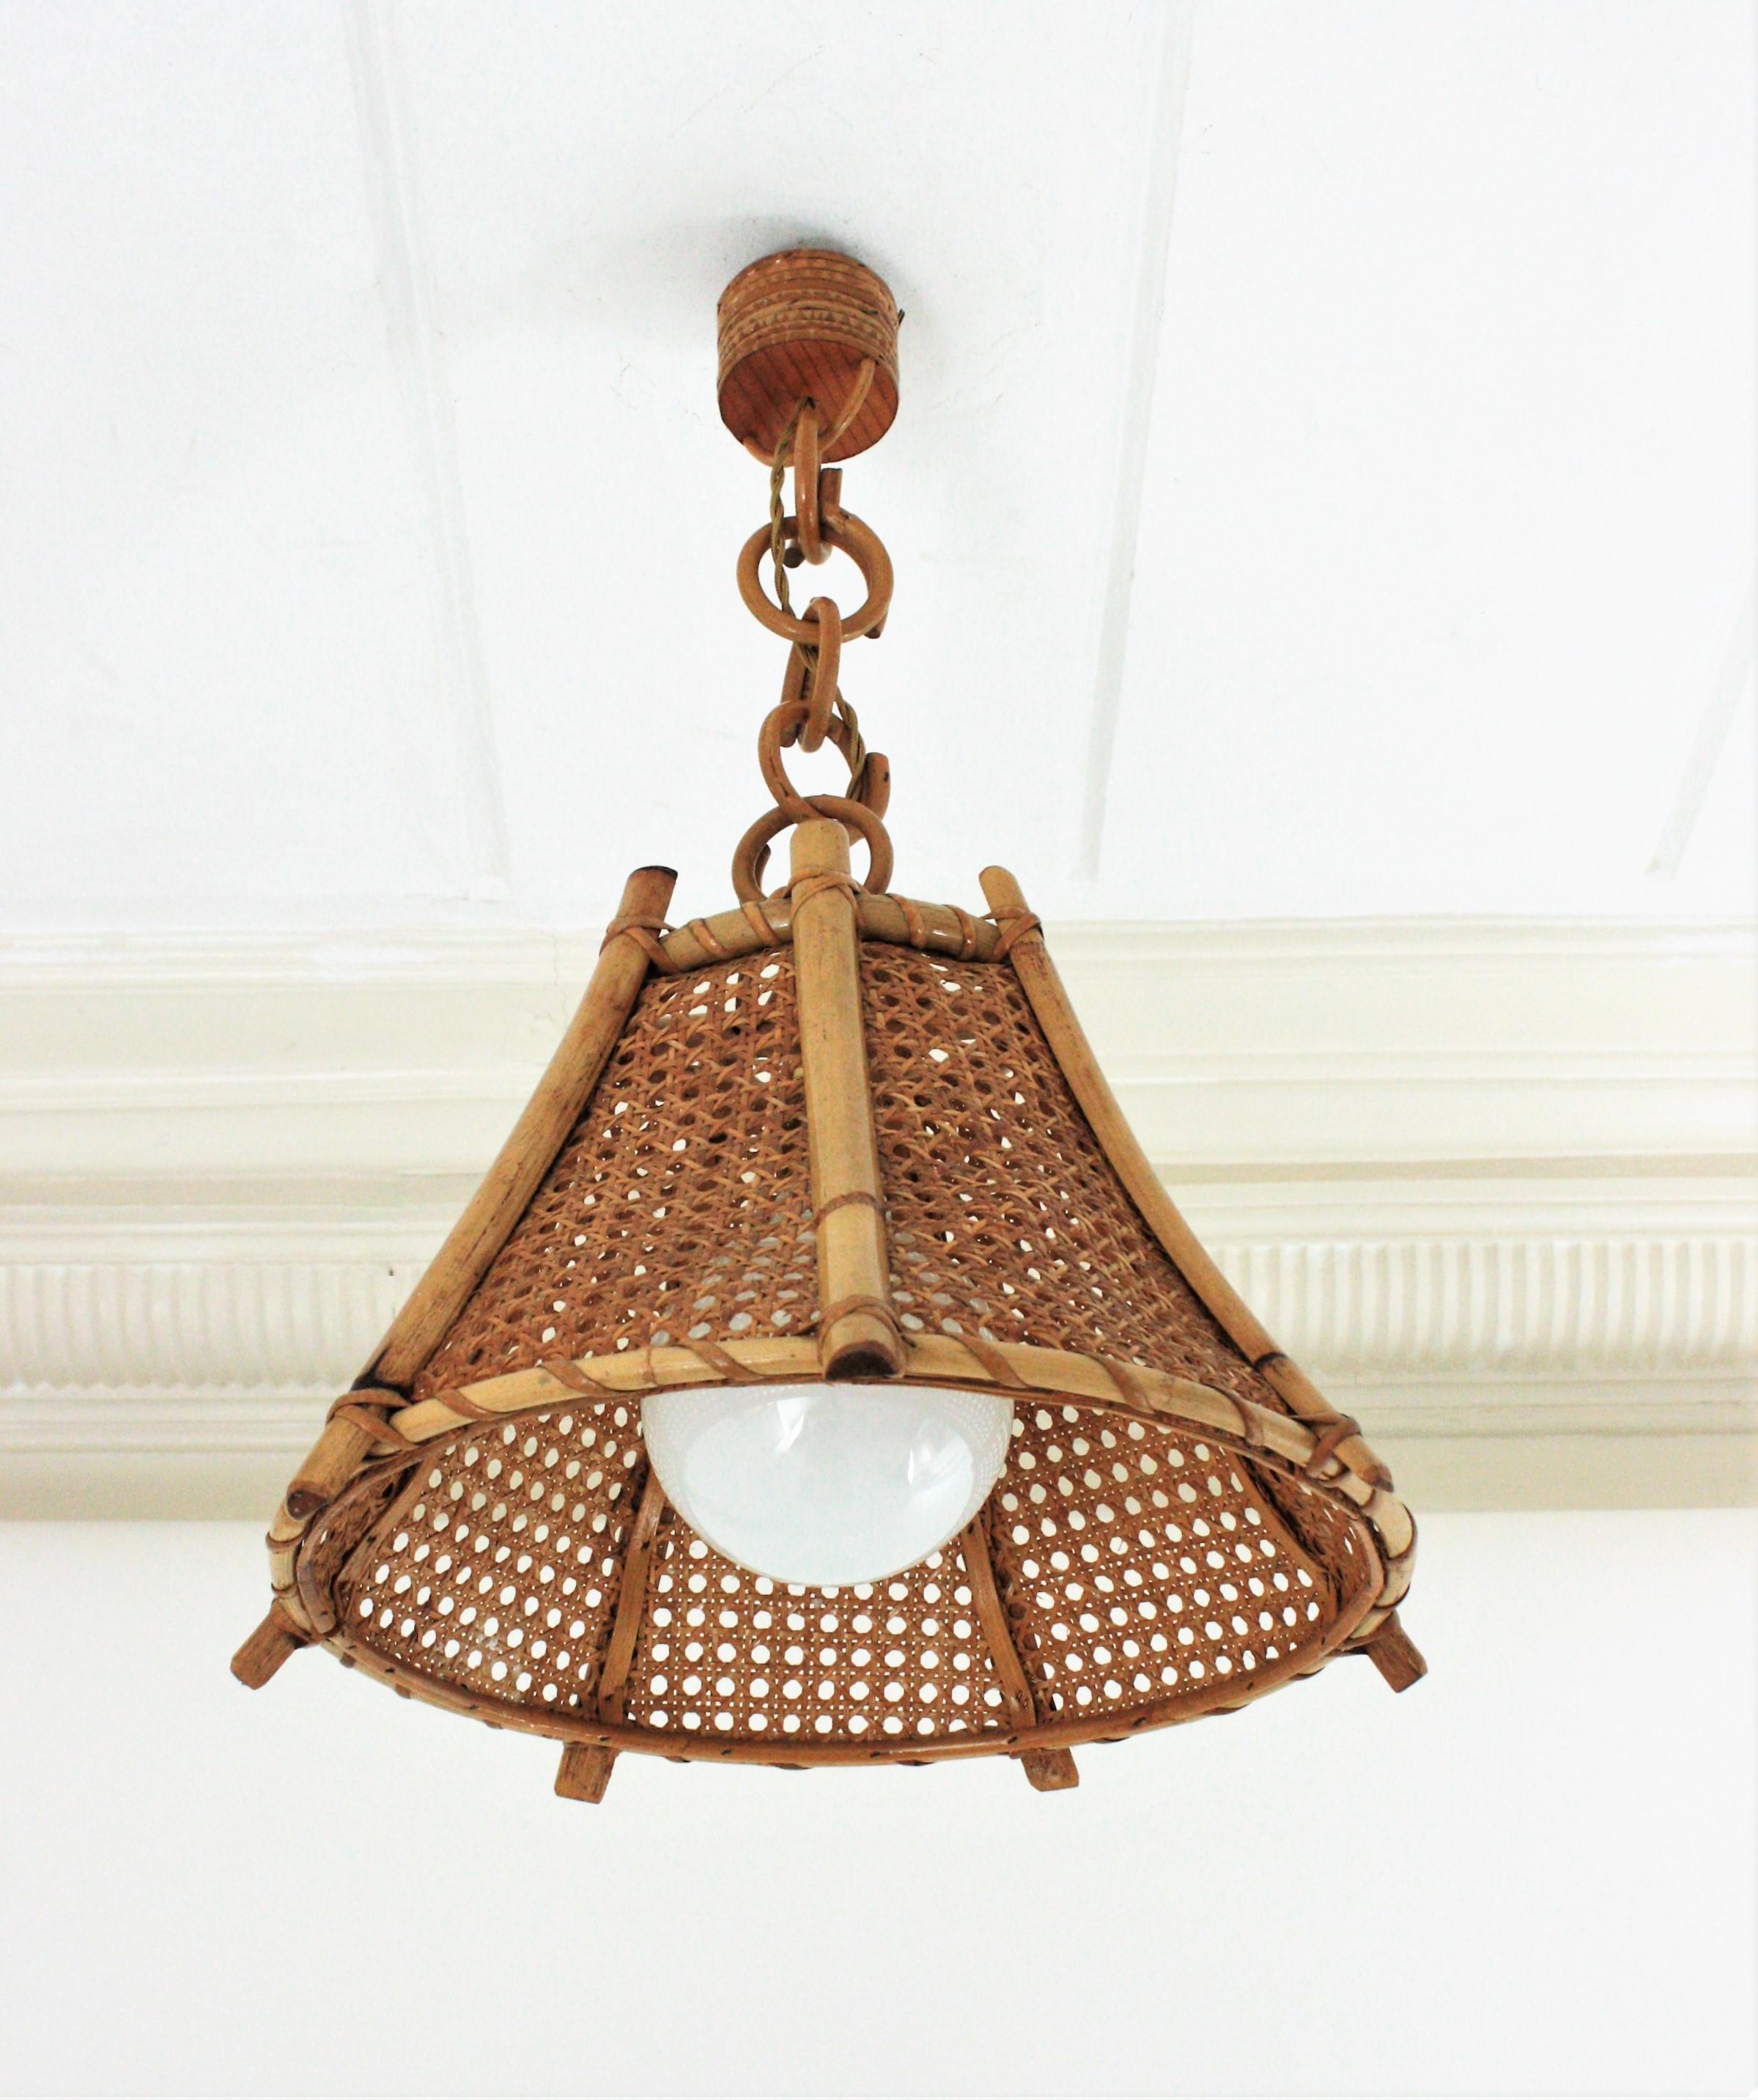 Bamboo Rattan and Wicker wire pagoda shaped pendant or chandelier, France, 1960s.
This midcentury suspension lamp features a wicker weave conical lampshade with bamboo vertical canes. It hangs from a chain with rattan links. We can add a larger